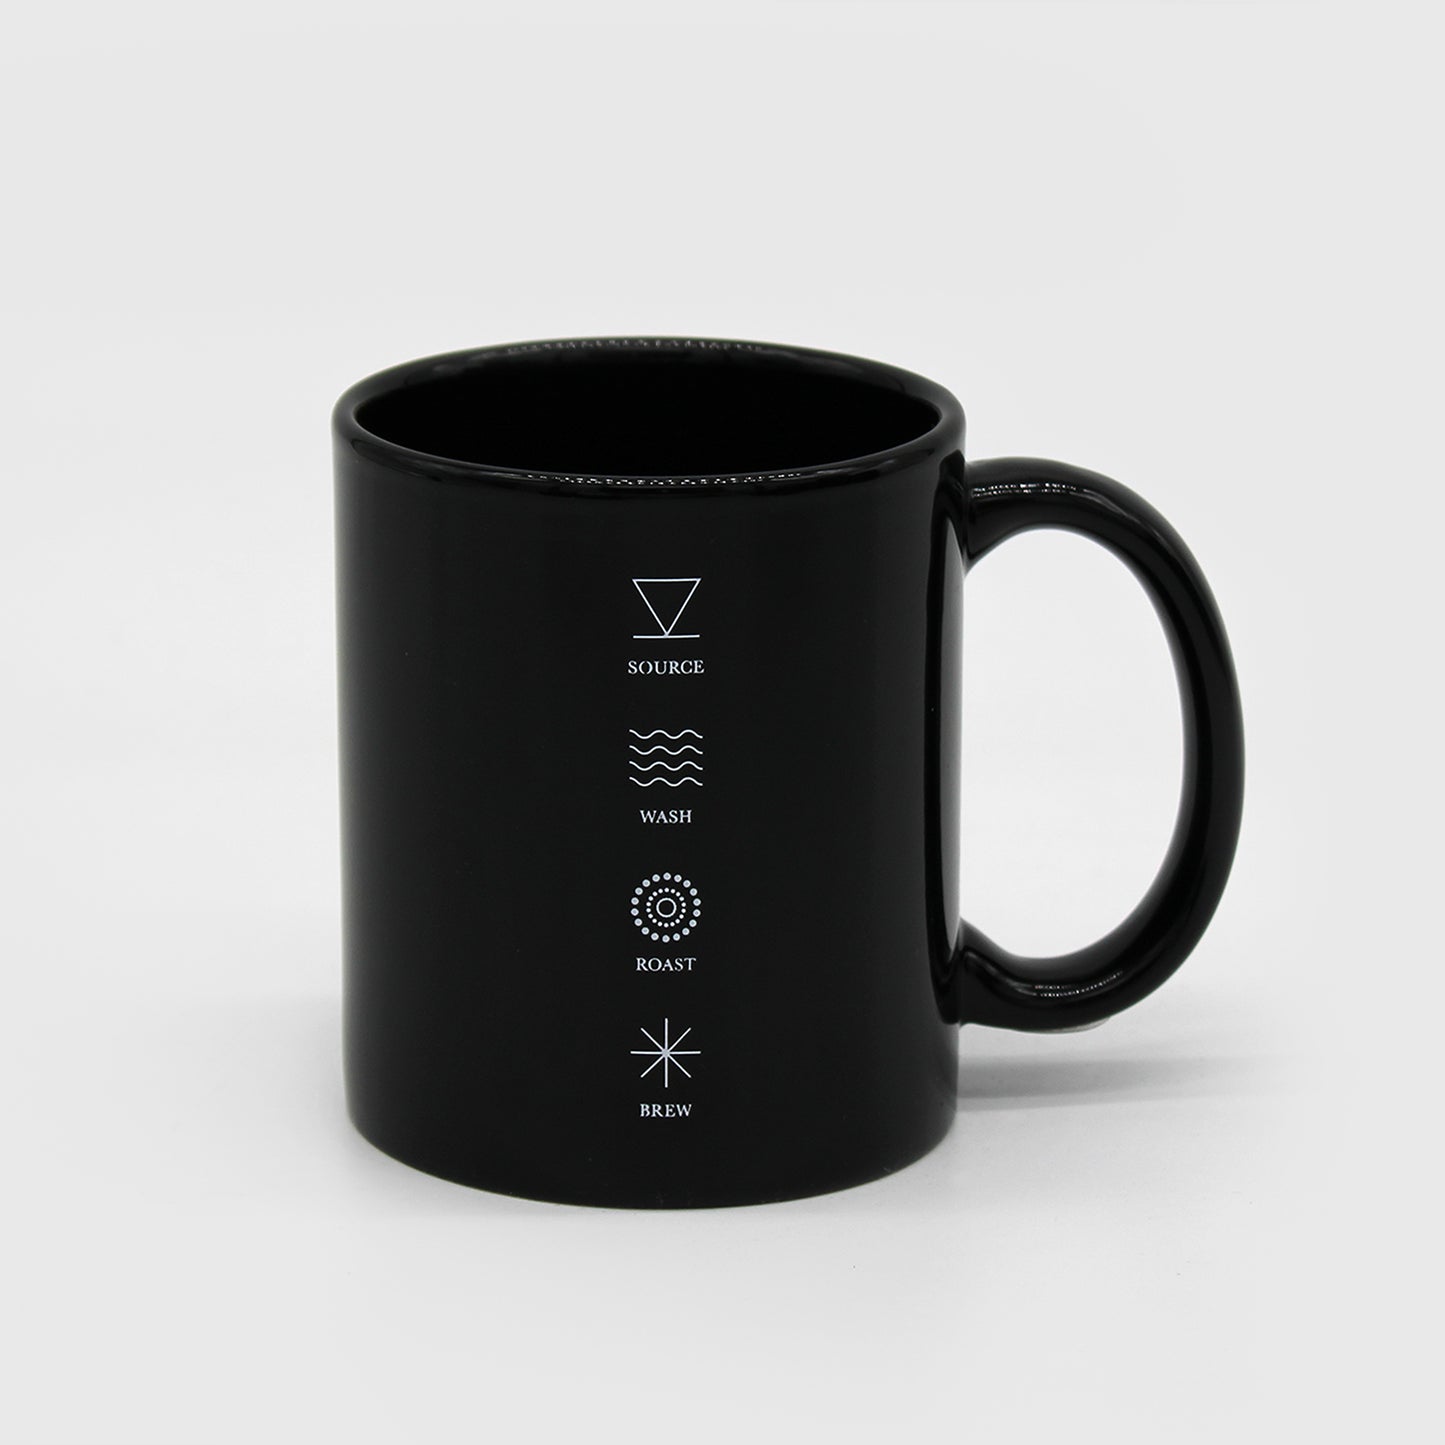 Black Ceramic mug with C handle, has 4 symbols aligned vertically, with text under each symbol that reads, “Source, Wash, Roast, Brew.” 1 of 3.